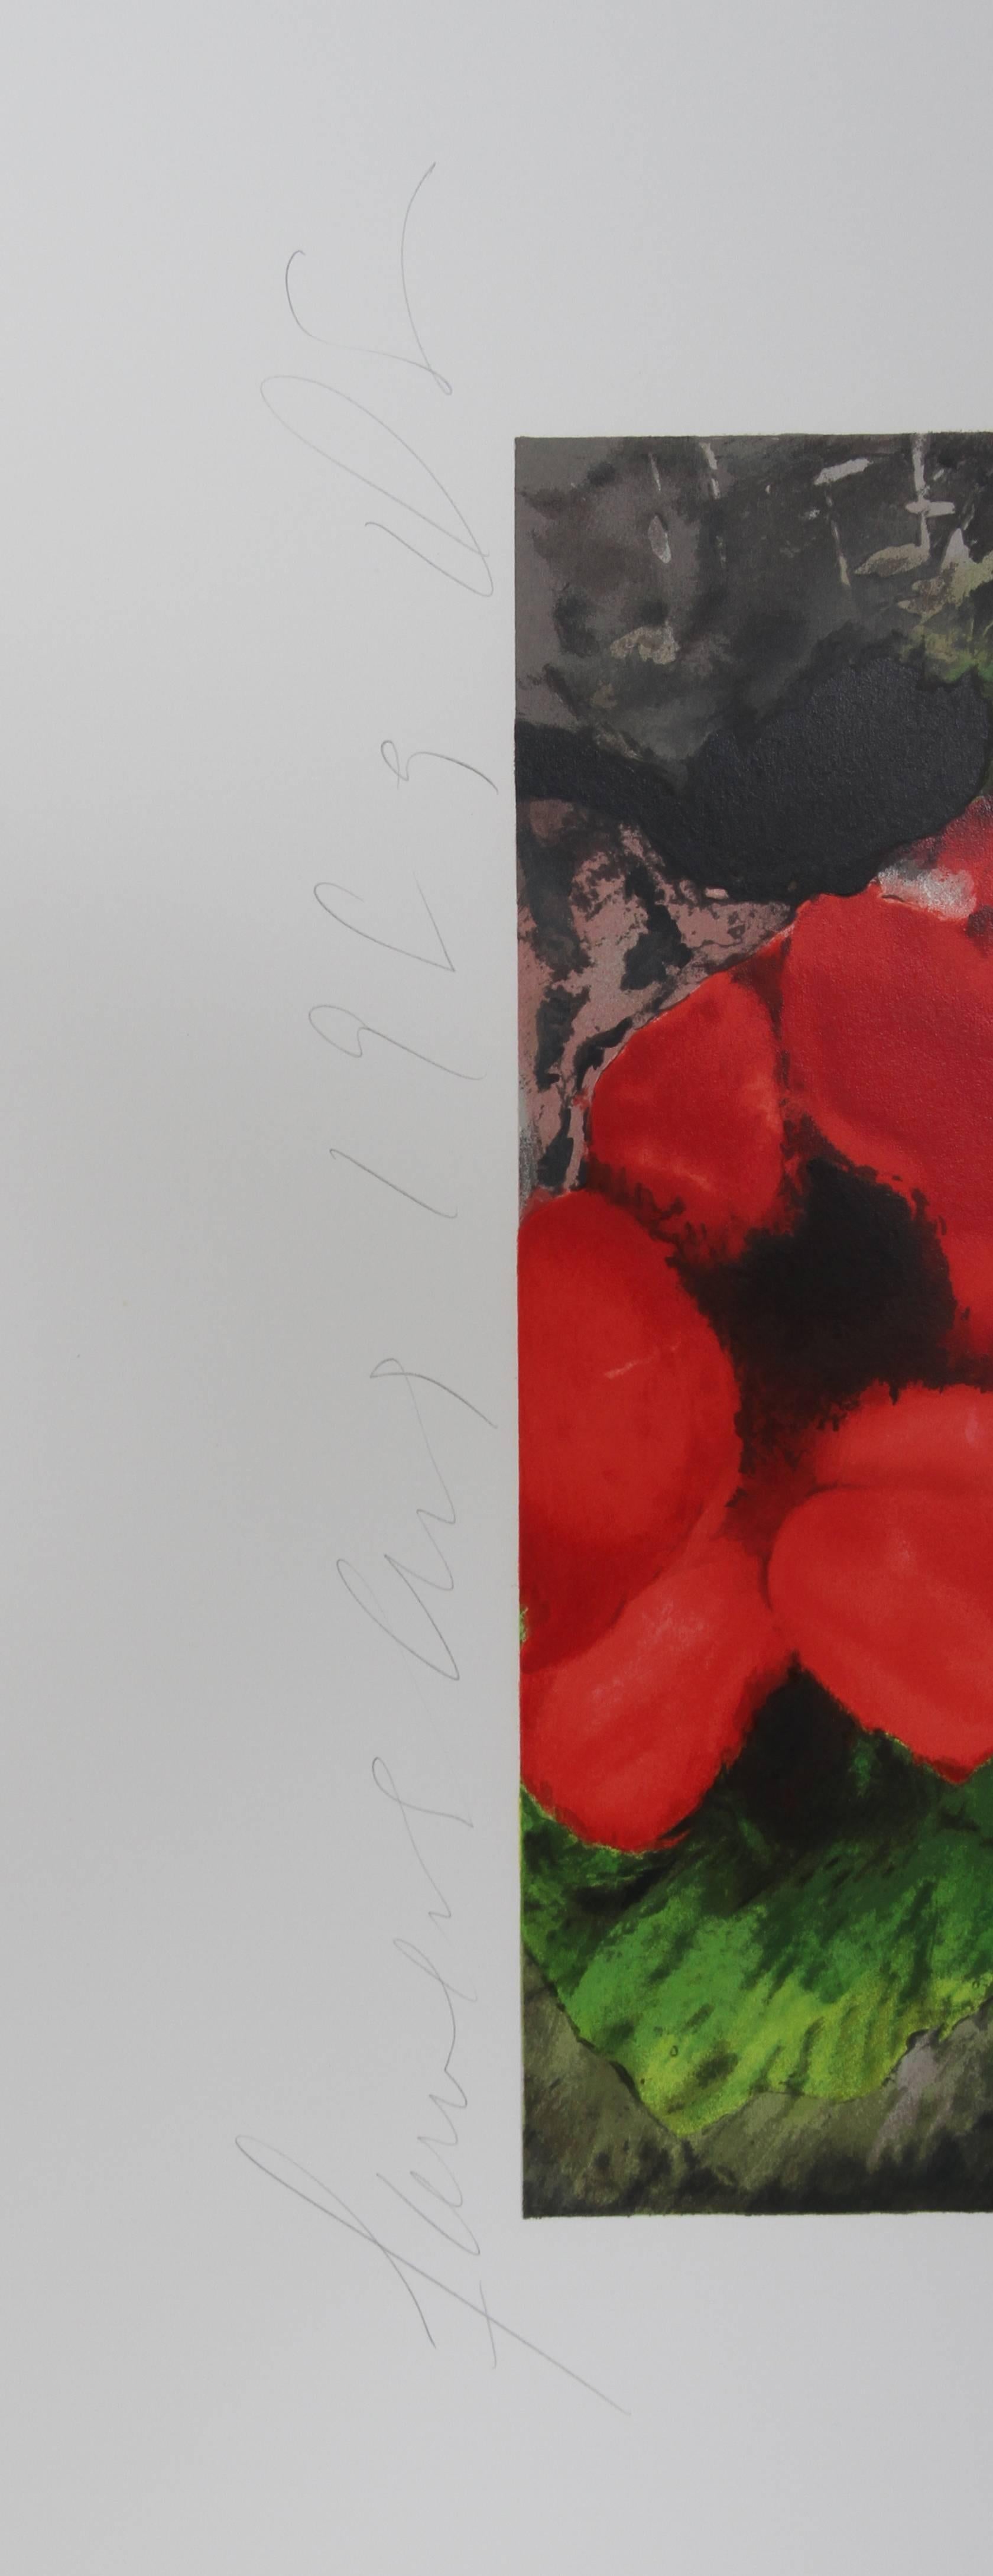 Artist: Donald Sultan, American (1951 - )
Title: Red Poppies
Year: 1989
Medium: Silkscreen, signed and numbered in pencil
Edition: 125
Image Size: 12 x 12 inches
Size: 23 x 22 in. (58.42 x 55.88 cm)